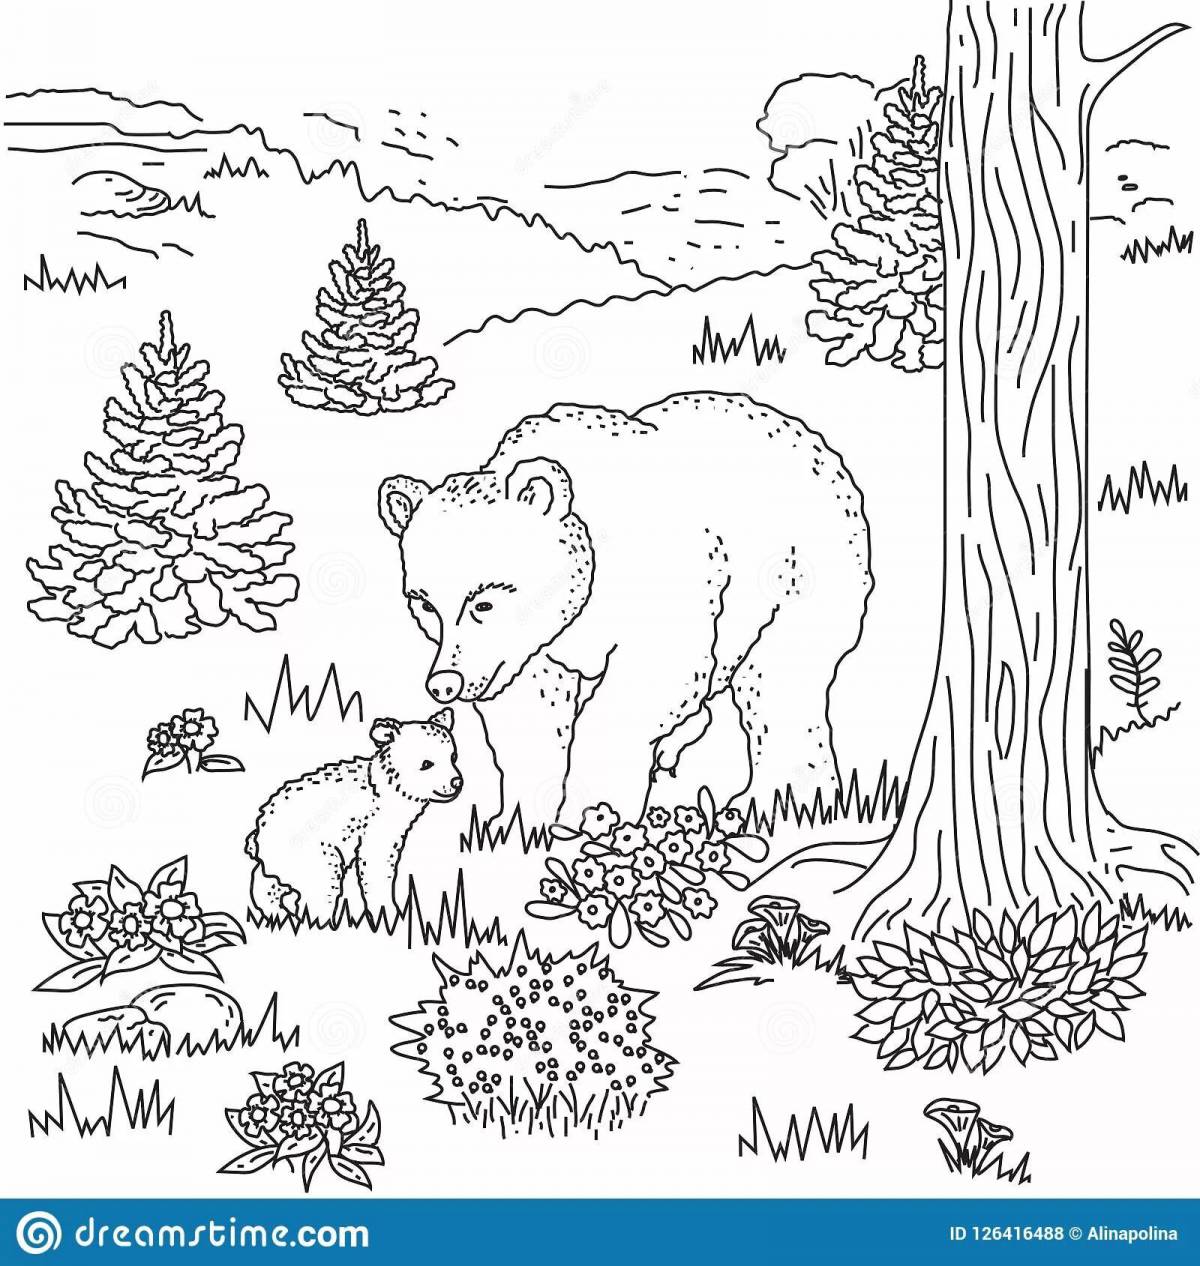 Bear in the forest #6